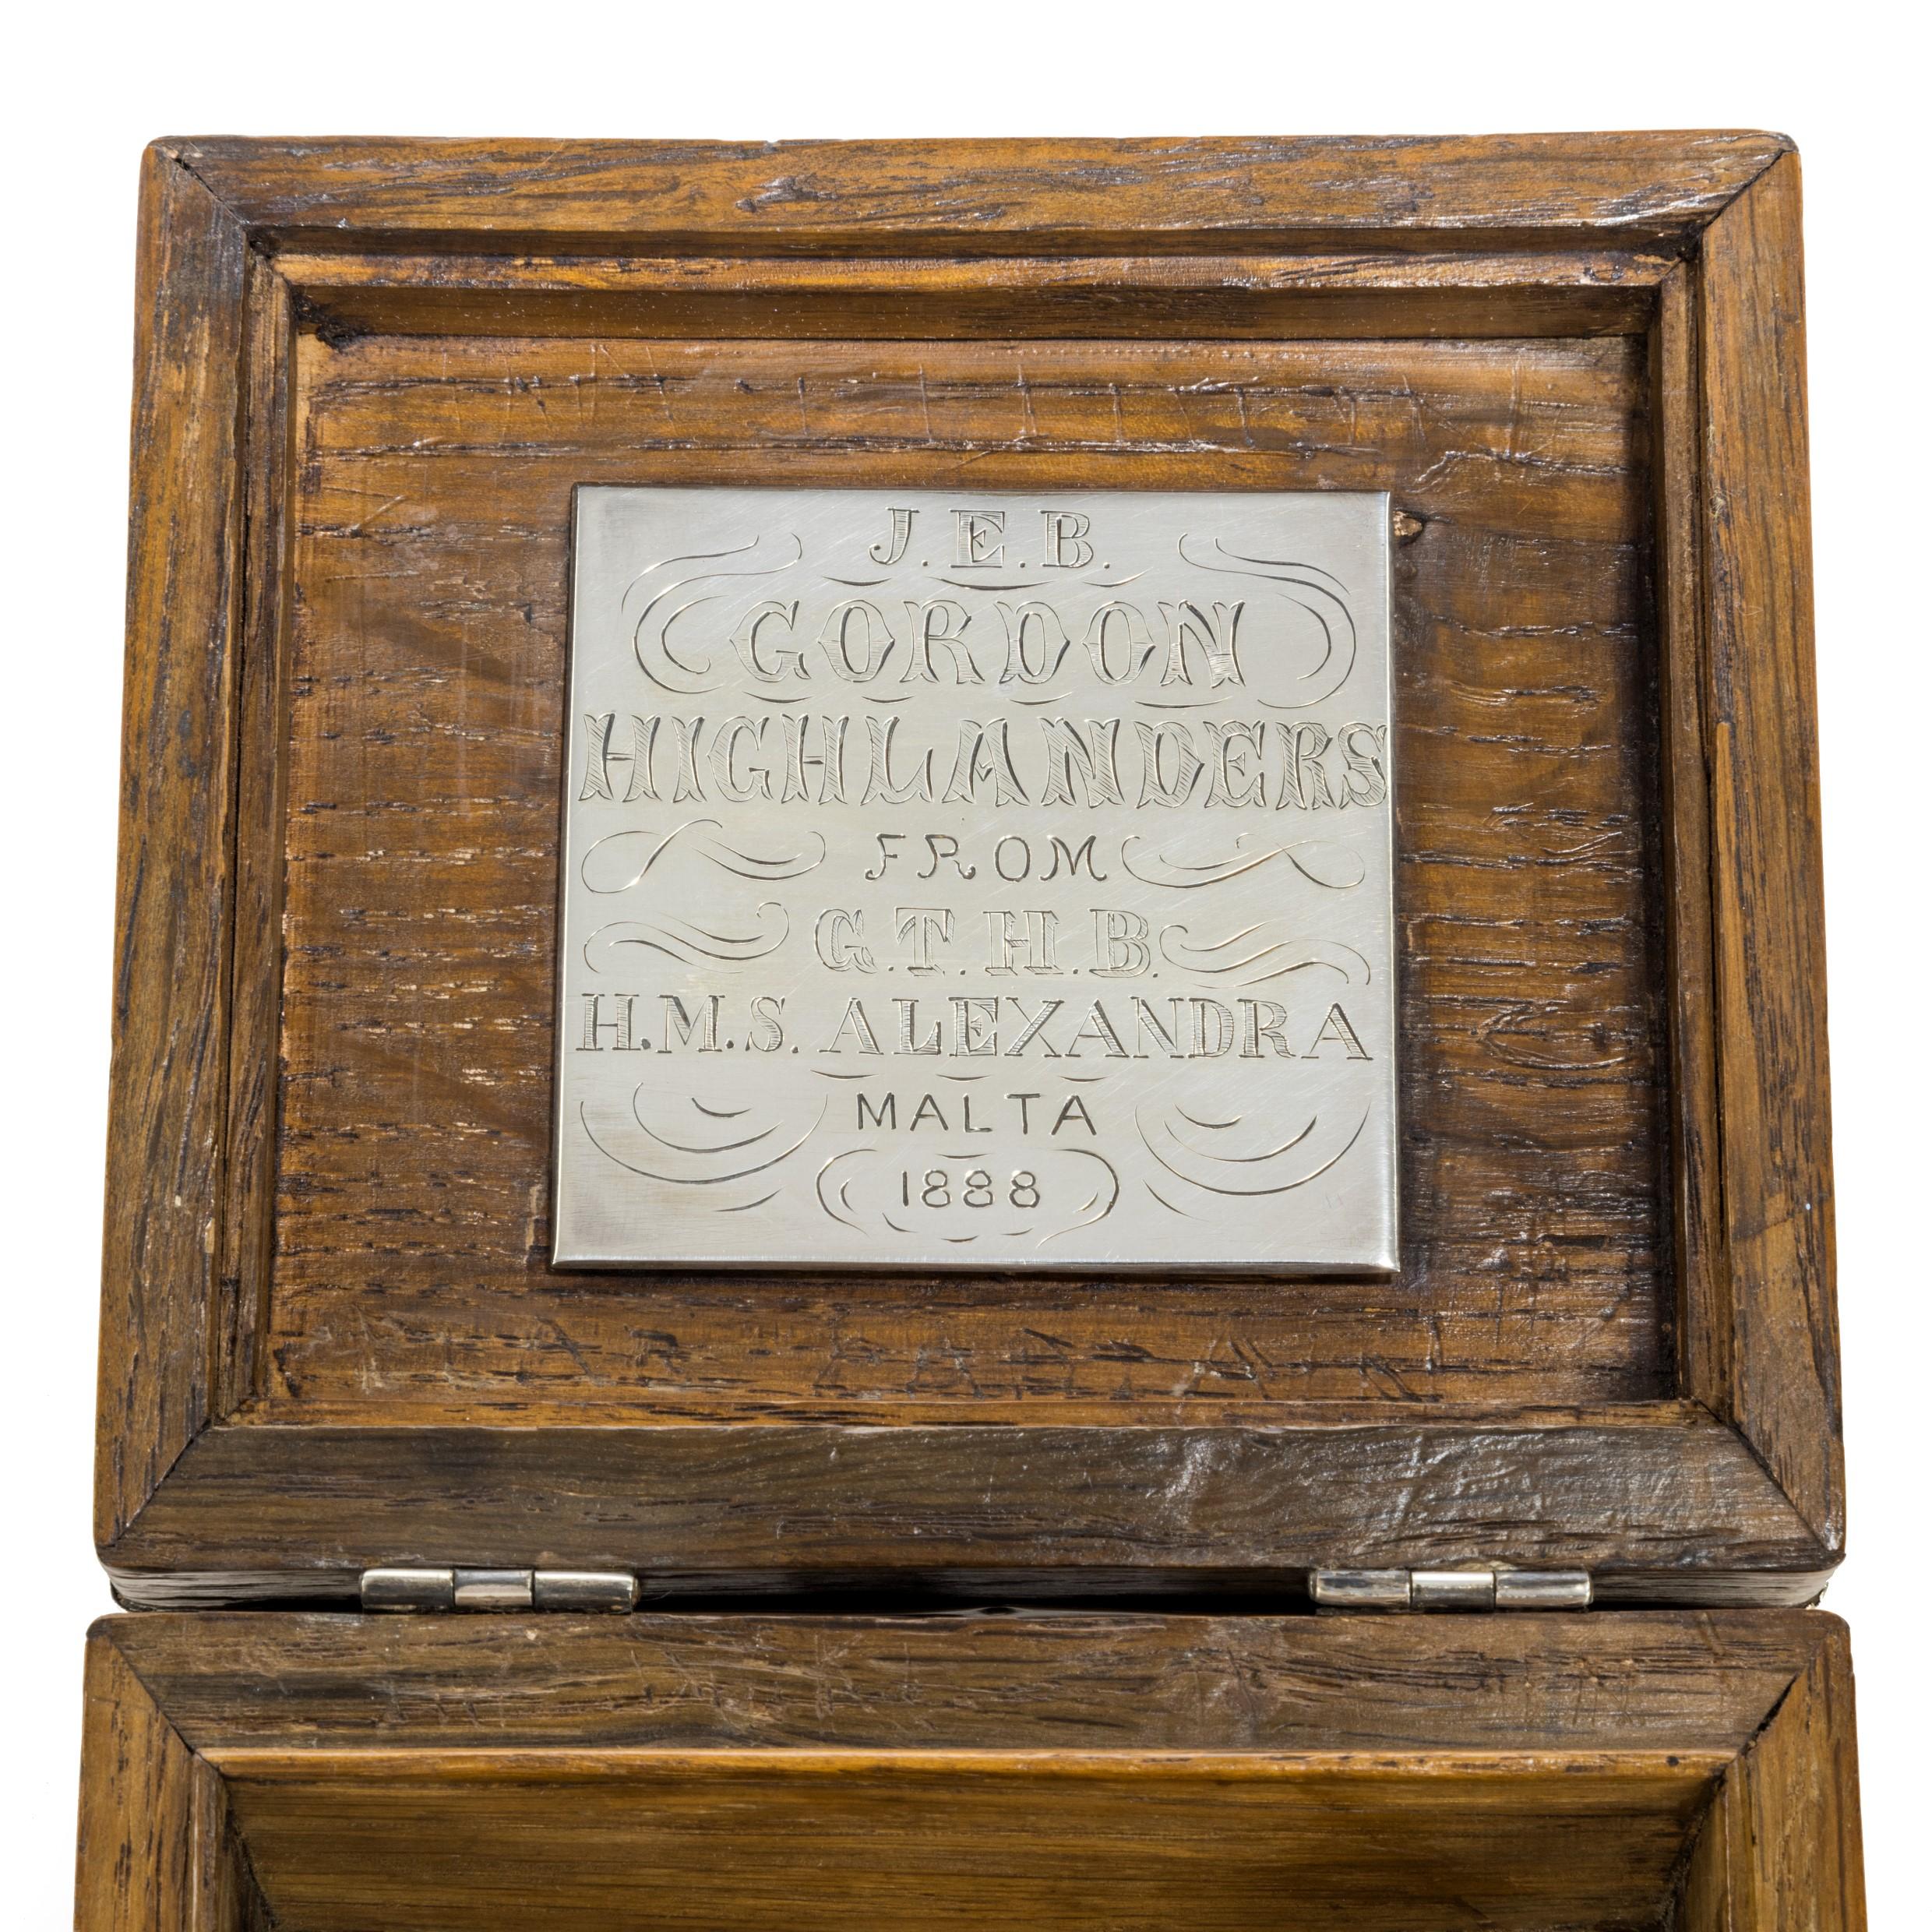 English Silver Mounted Commemorative Box Made from ‘Victory’ Oak